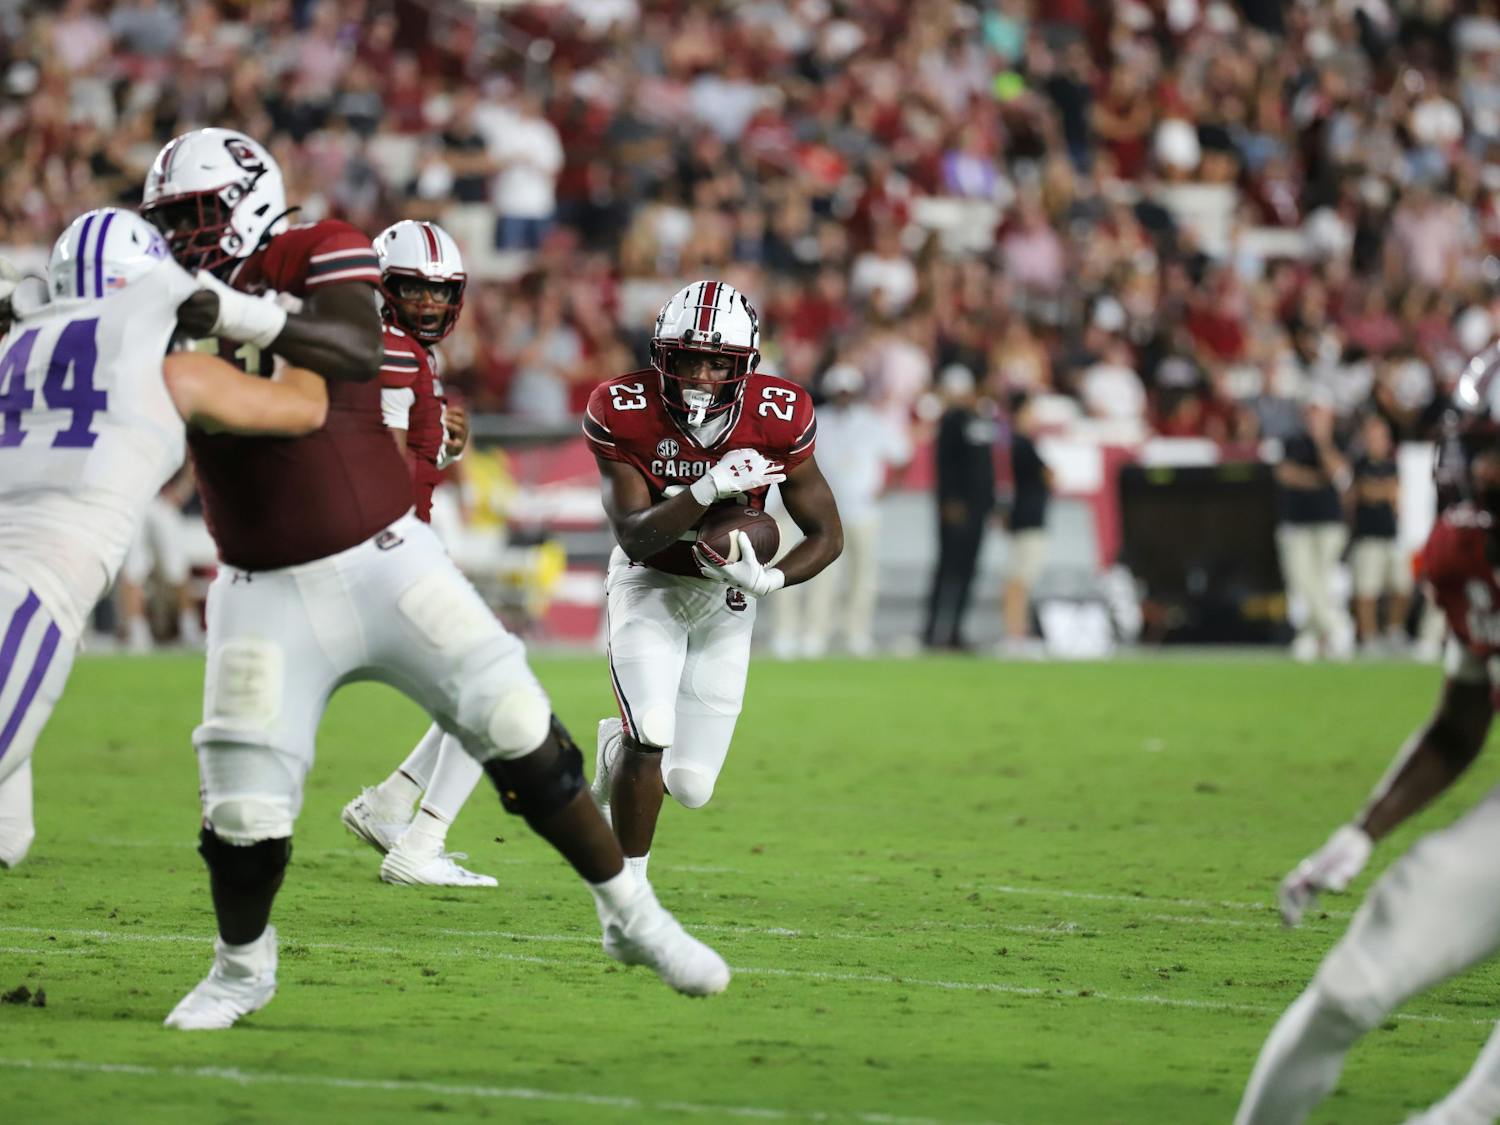 Freshman running back Djay Braswell searches for a hole late in South Carolina's 47-21 win over Furman. The win was the Gamecocks' first of the season in its first home game since defeating Tennessee in late 2022.